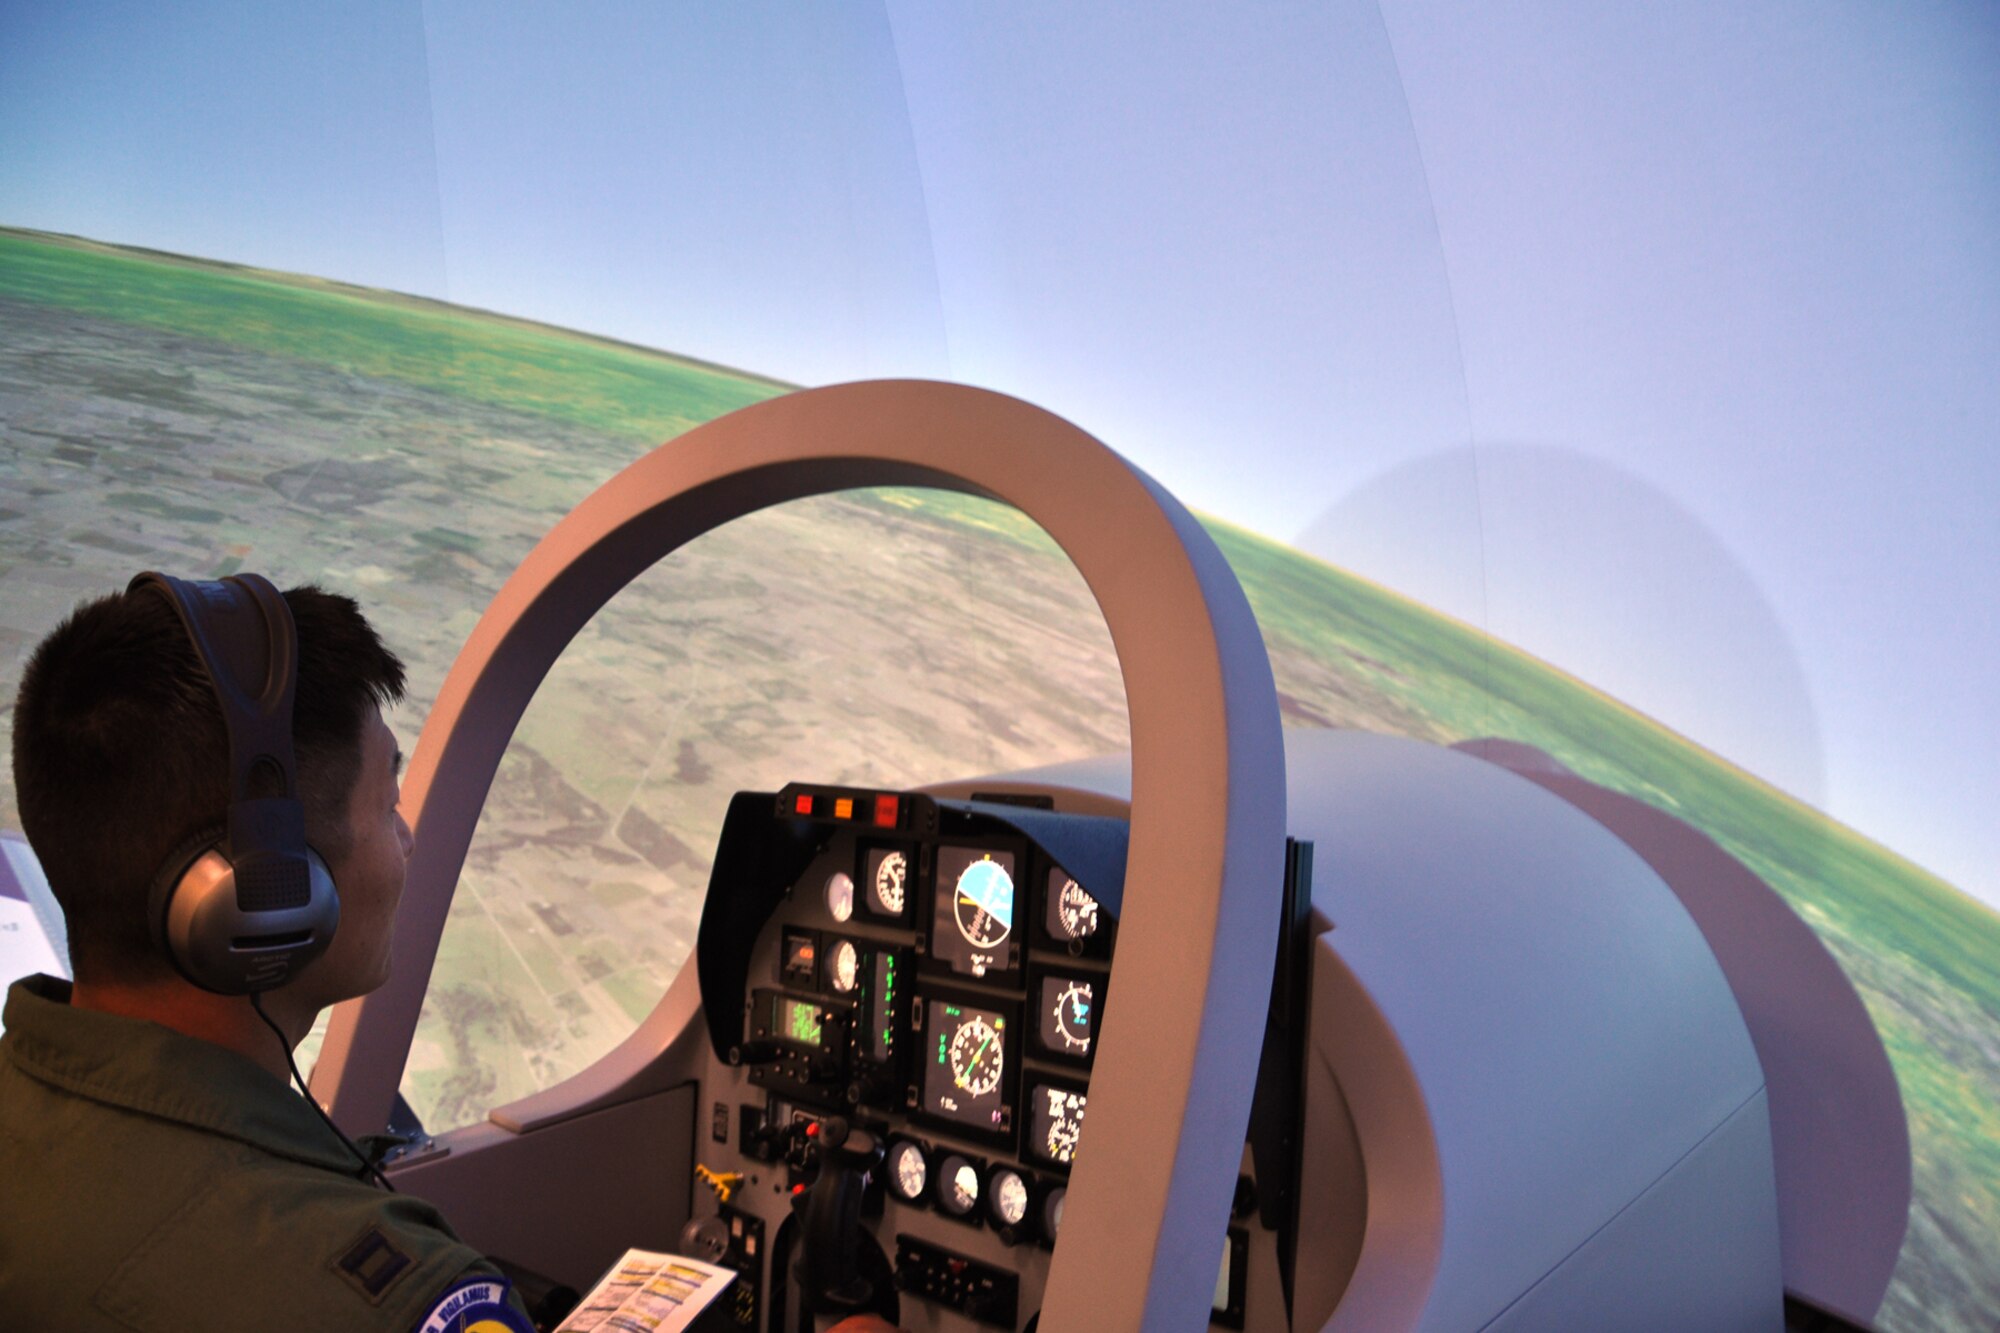 A student pilot enrolled in Undergraduate Remotely Piloted Aircraft Training at the 558th Flying Training Squadron, Joint Base San Antonio-Randolph, Texas, takes off in a new T-6 Texan II simulator July 10. The 558 FTS purchased 10 new simulators for $3 million, which saved the squadron millions of dollar when compared to a traditional T-6 simulator, which cost $3 million each. EDITOR'S NOTE: The student pilot's name was withheld due to security concerns. (U.S. Air Force photo/Staff Sgt. Clinton Atkins)